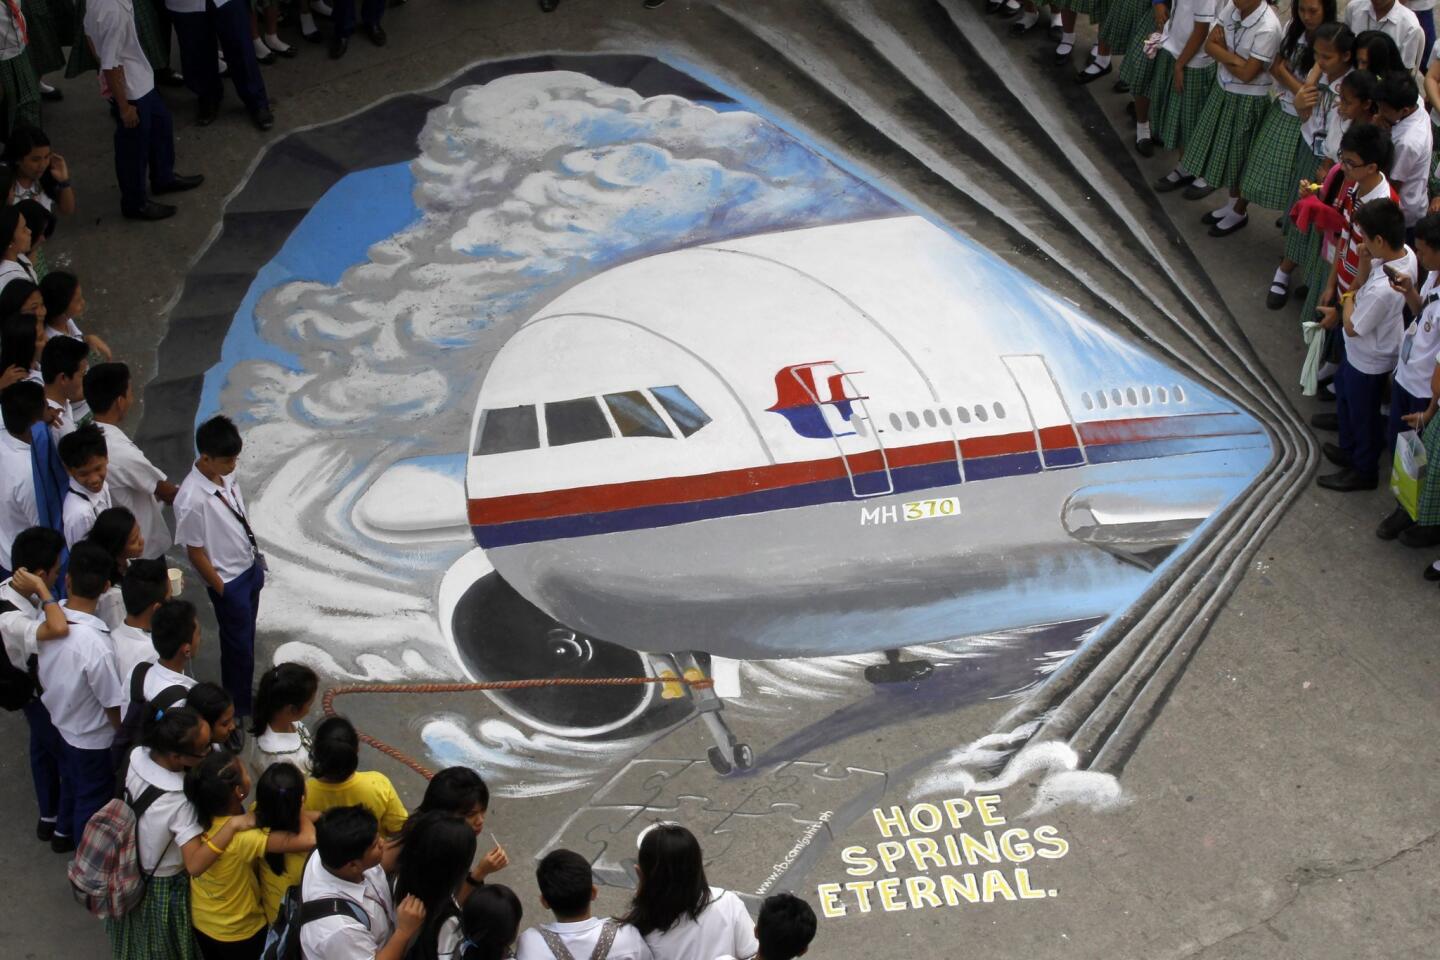 Filipino artists from the Guhit Visual Arts Group painted an image of Malaysia Airlines Flight MH370 at the Benigno Ninoy Aquino High School grounds in Makati City, south of Manila, Philippines, 17 March 2014 to express hope and solidarity for the passengers and crew of the missing Malaysia Airlines flight 370.